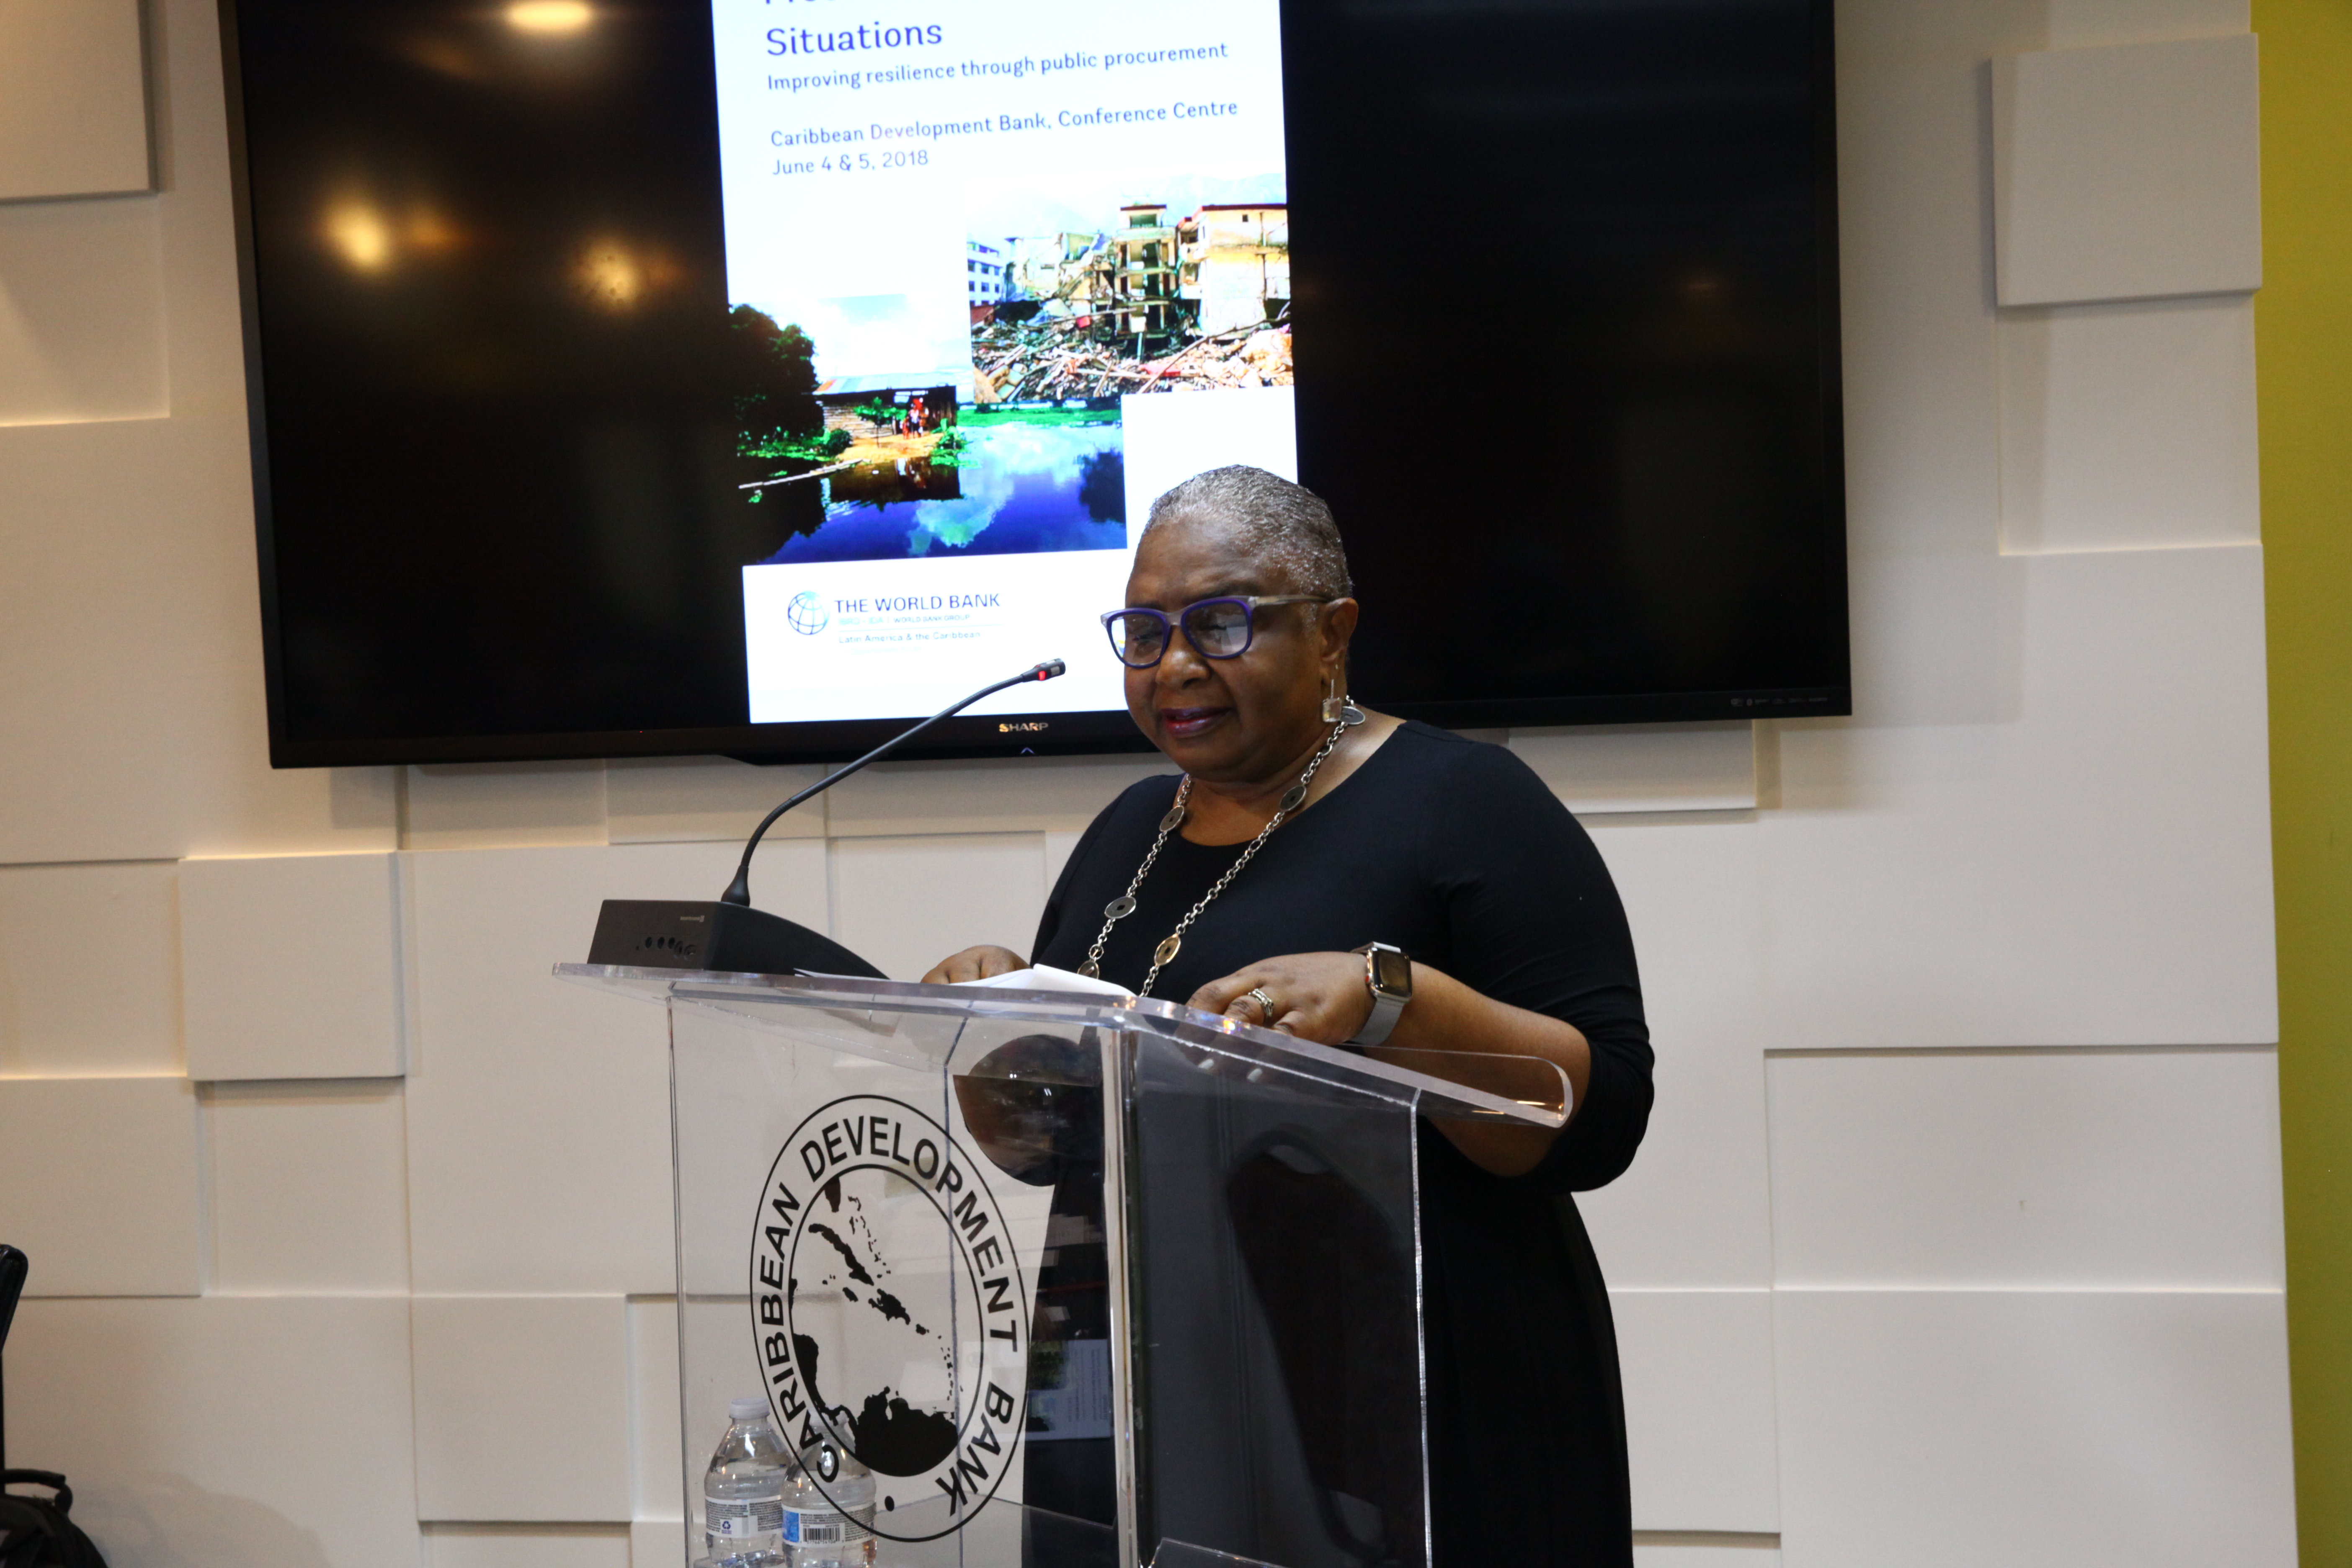 Cheryl Dixon, Coordinator, Environmental Sustainability Unit, CDB, stresses the importance of understanding procurement in emergency situations during her opening remarks.